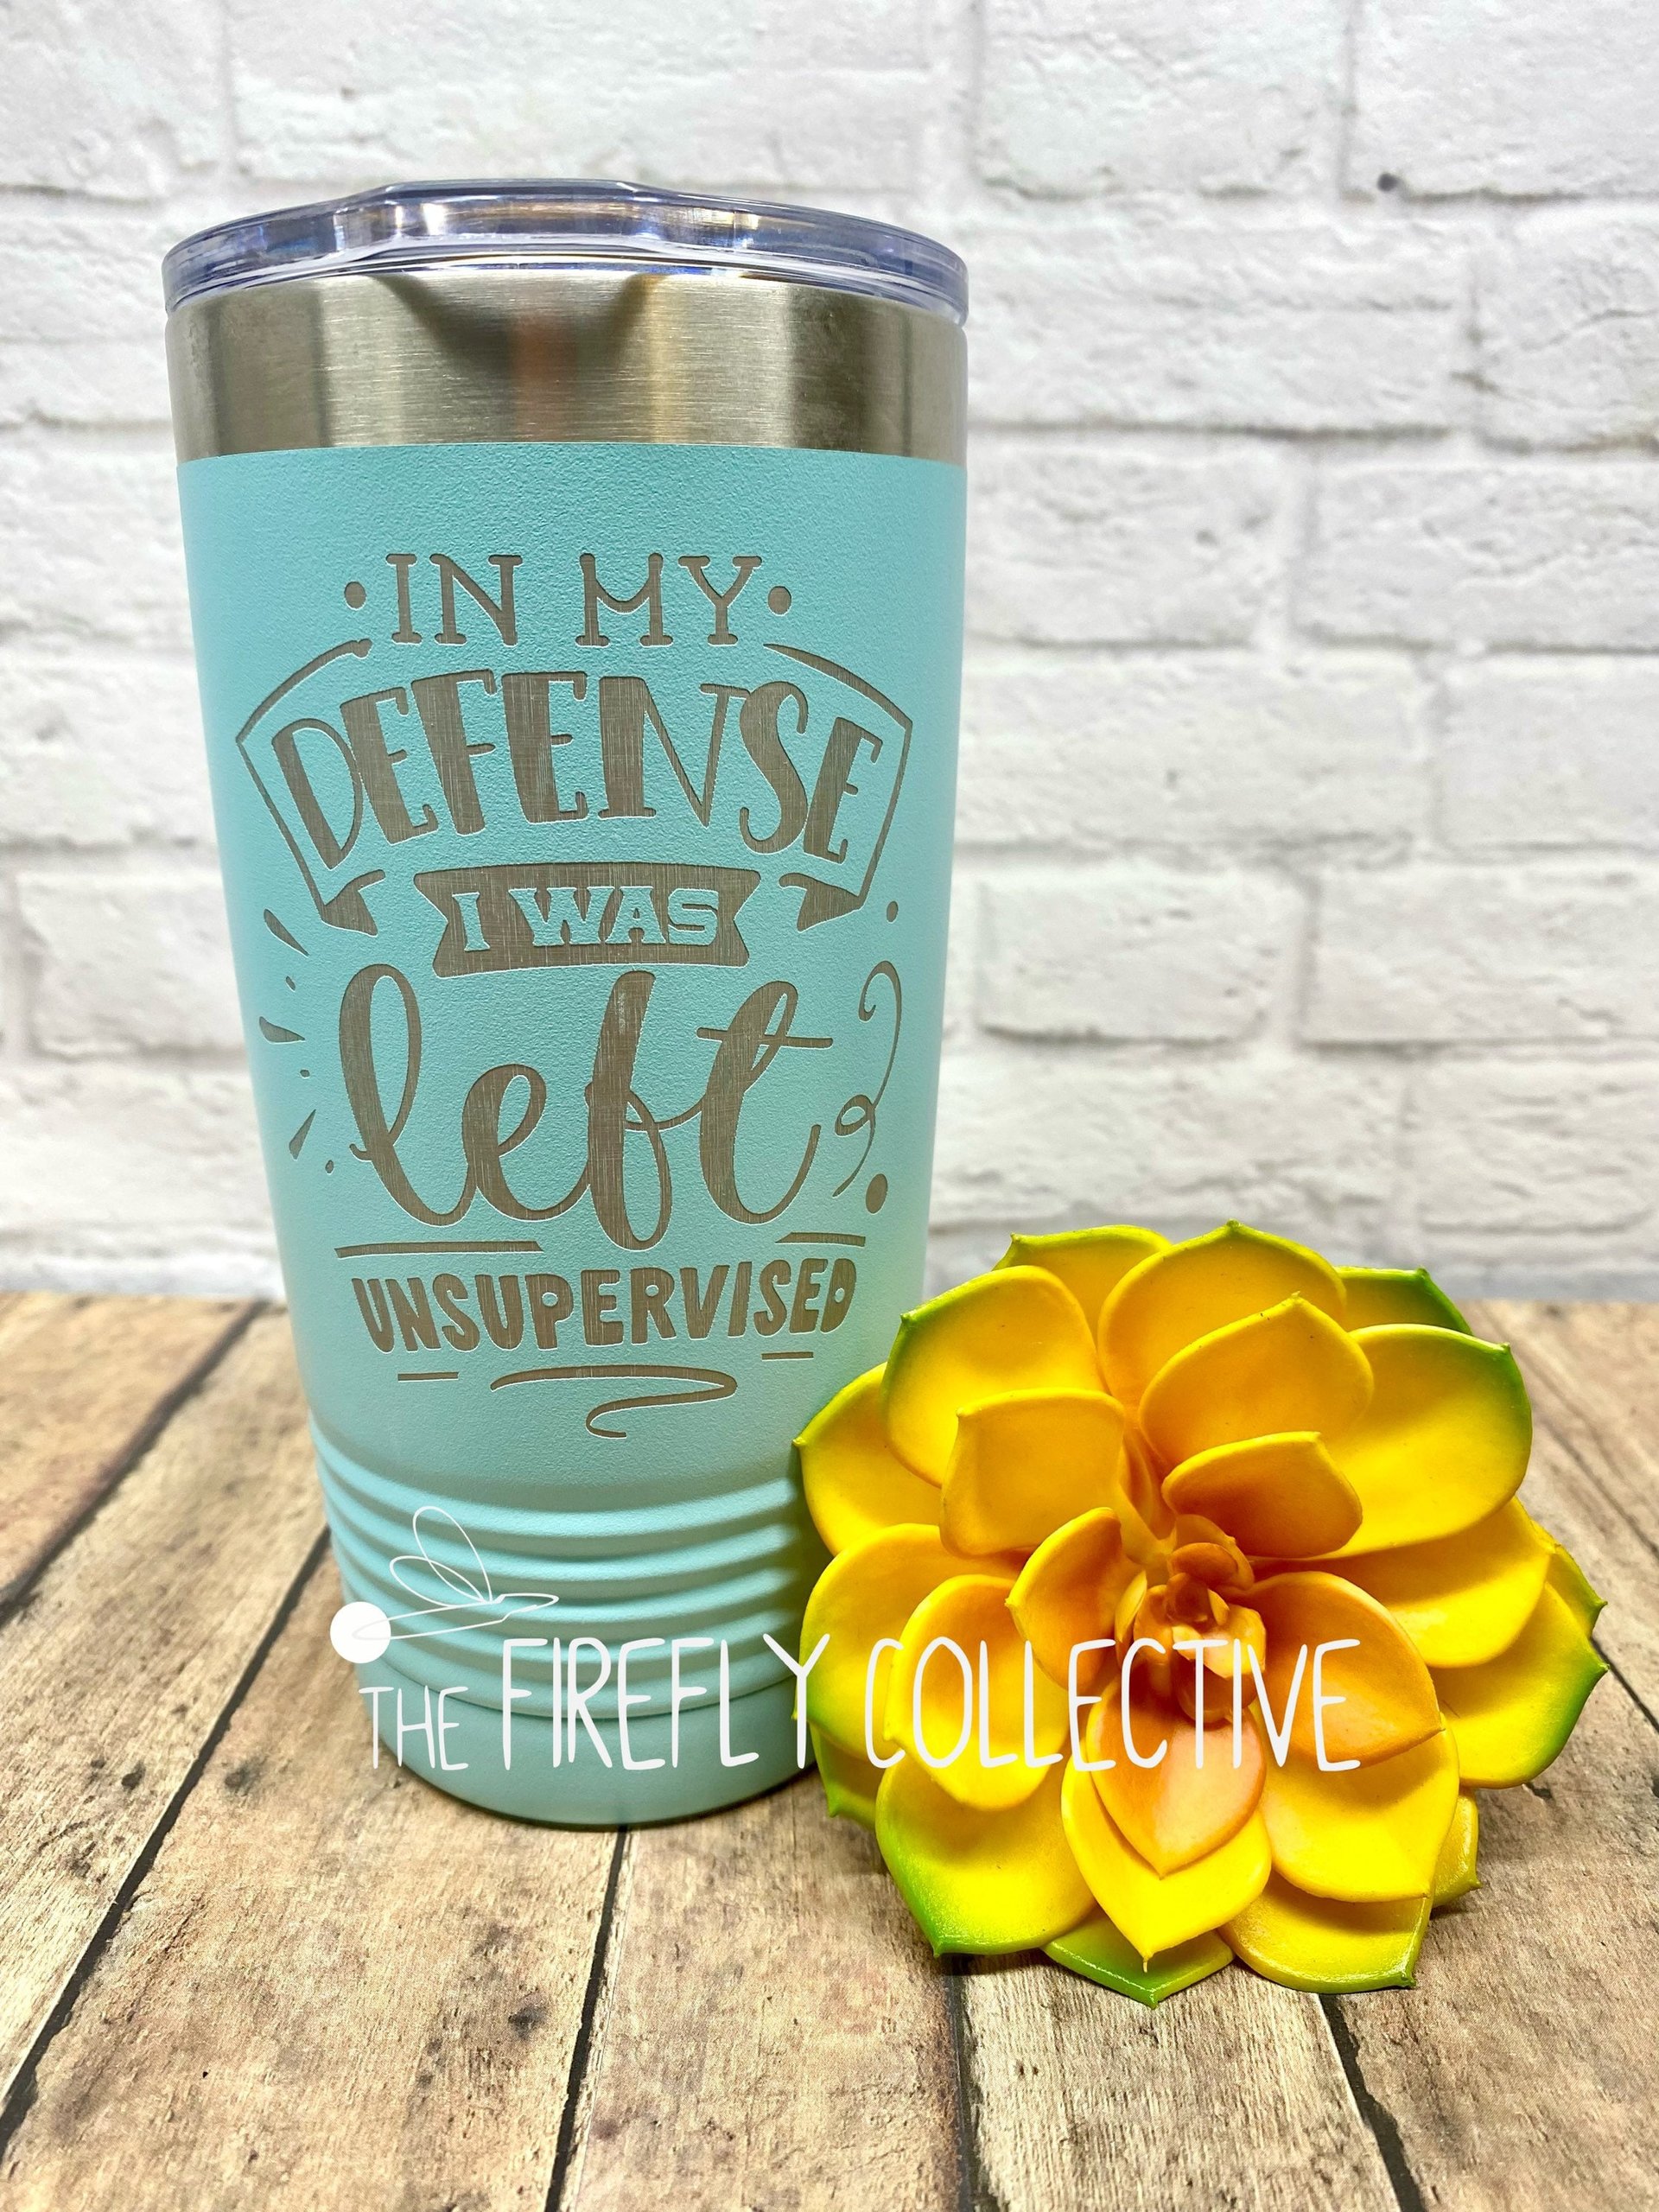 In My Defense I was Left Unsupervised 20 oz Stainless Steel Tumbler (Travel Coffee Mug) Laser Engraved - Humor, Sarcastic